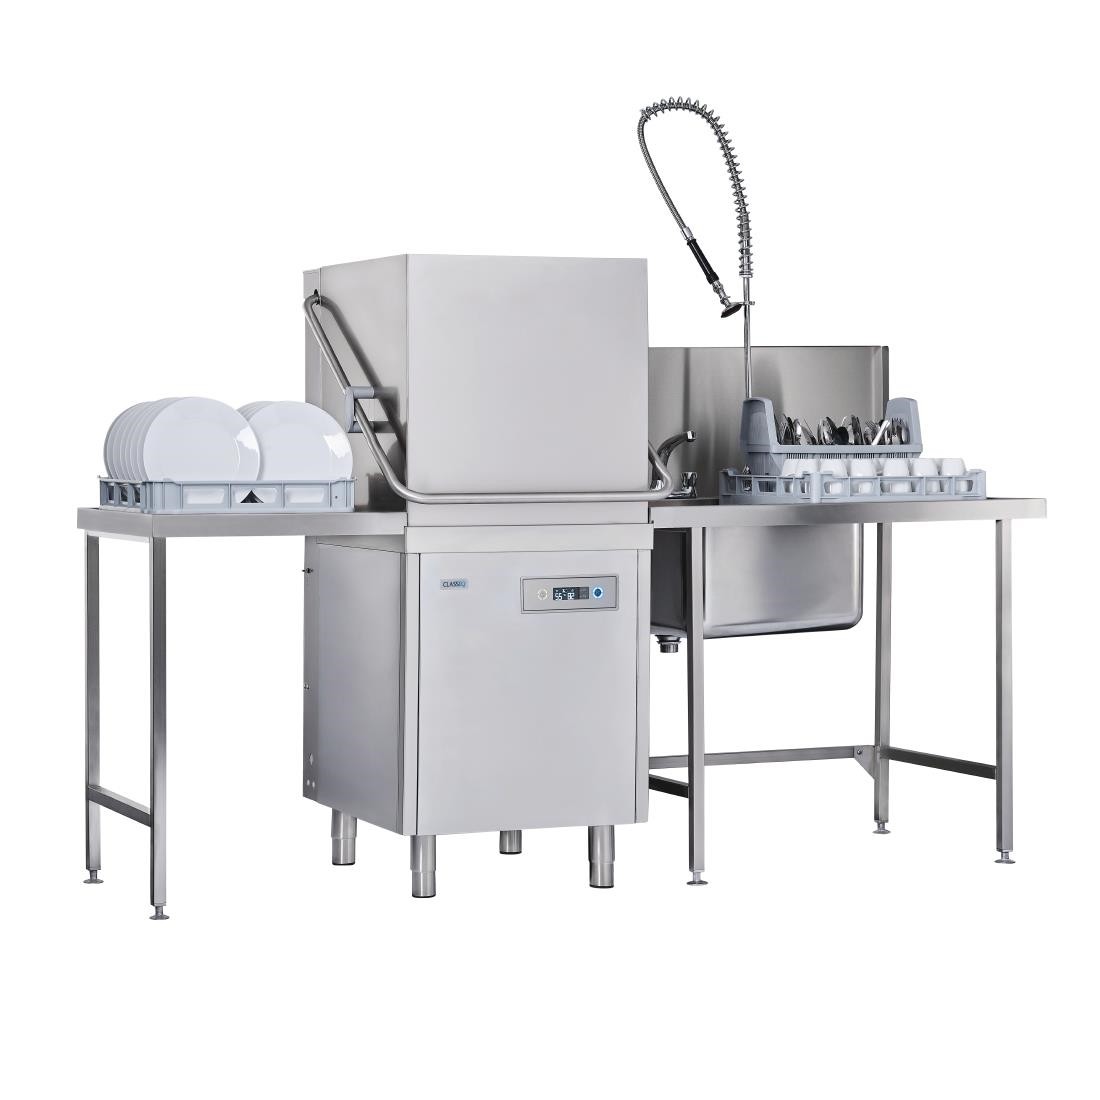 Classeq Pass-through Dishwasher P500 for Intensive Use